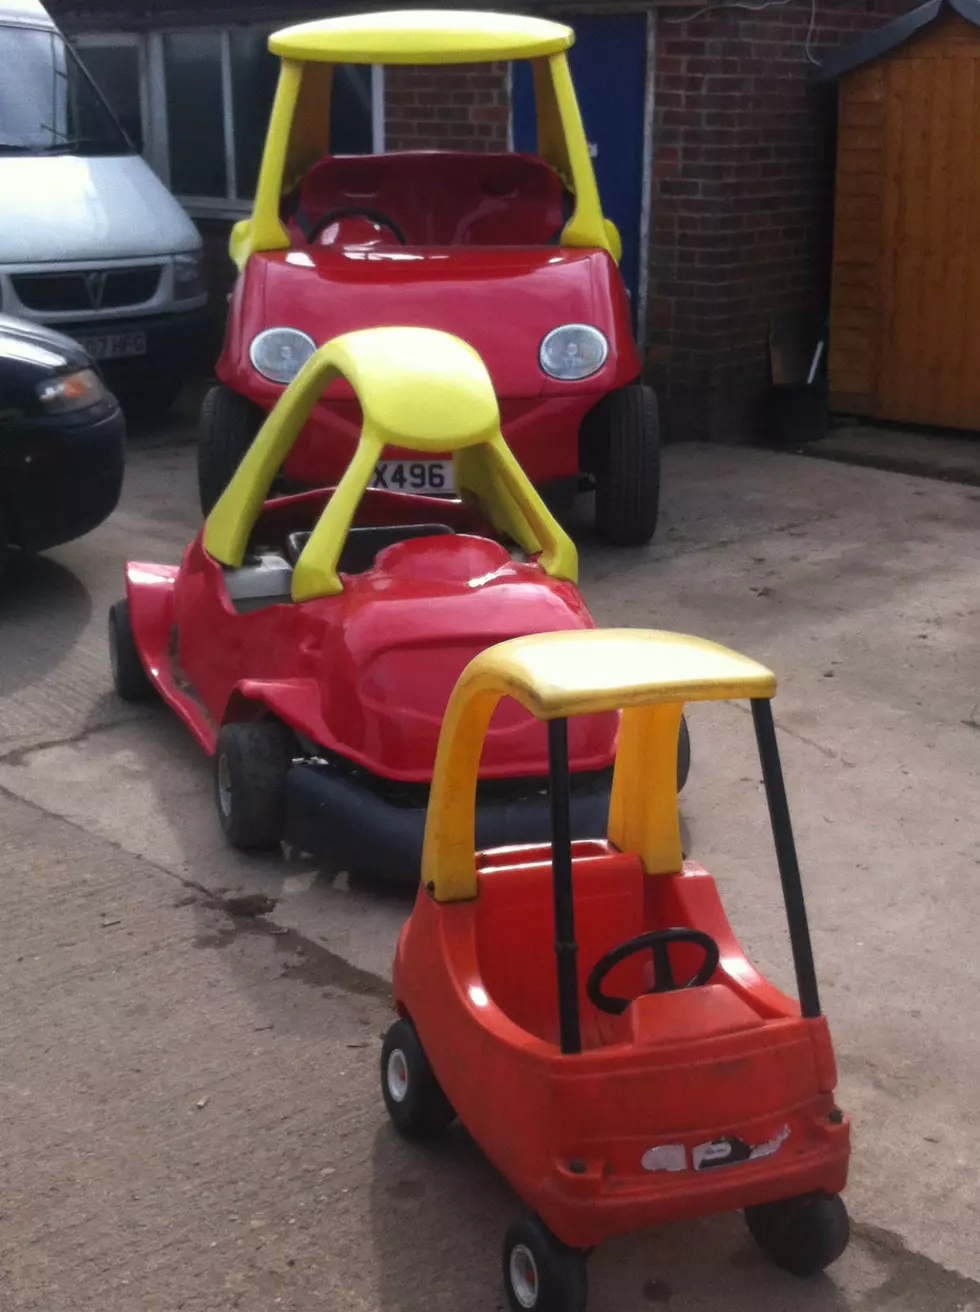 You Can Buy and Drive a Real Life Little Tikes Car [PHOTOS]